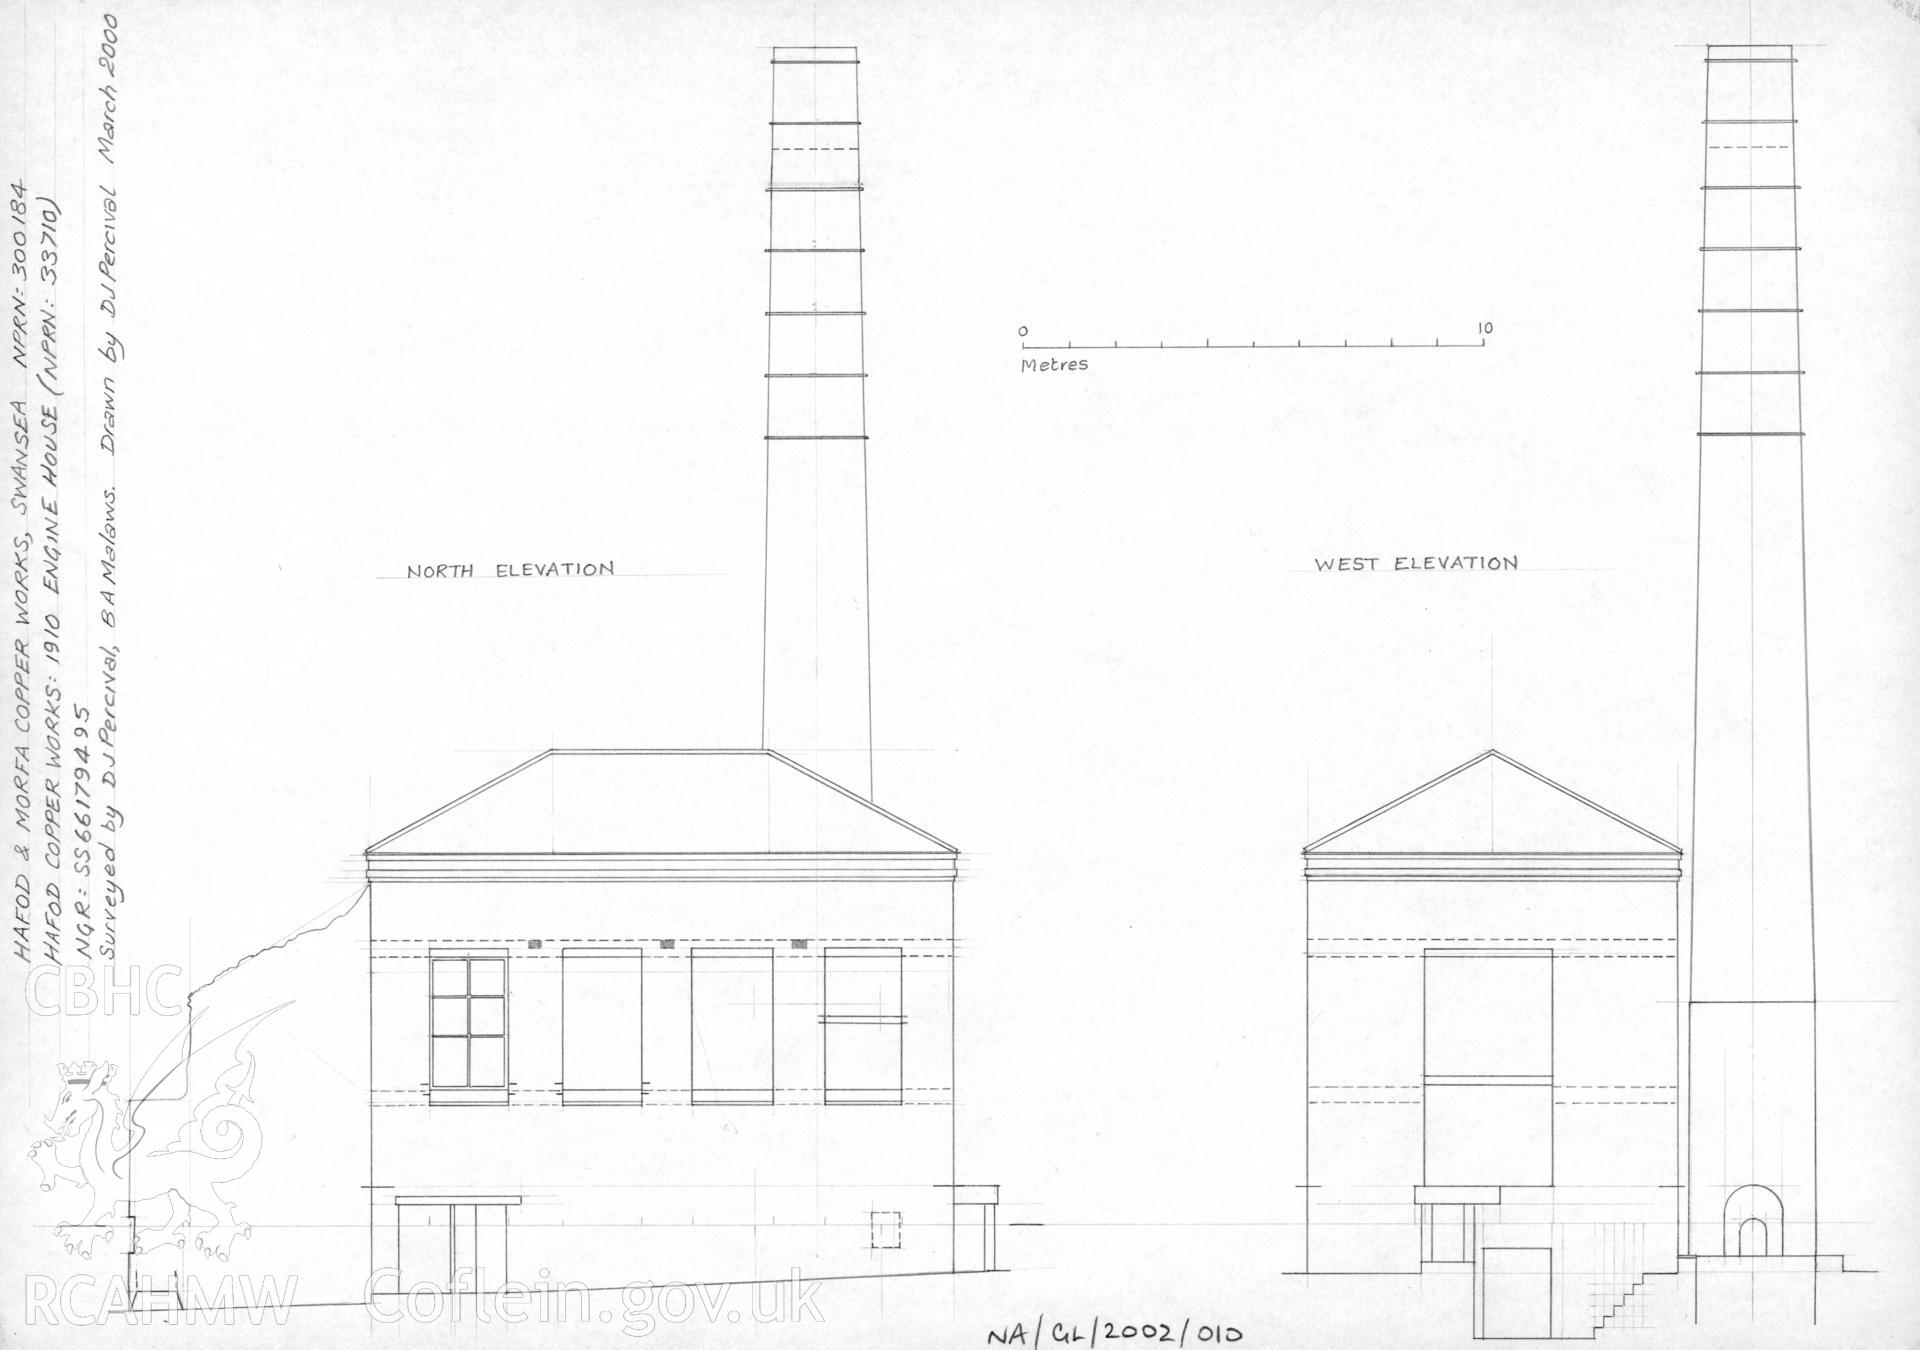 Measured survey comprising north and west elevation views of the 1910 engine house at Hafod and Morfa Copperworks, drawn by David Percival, March 2000.